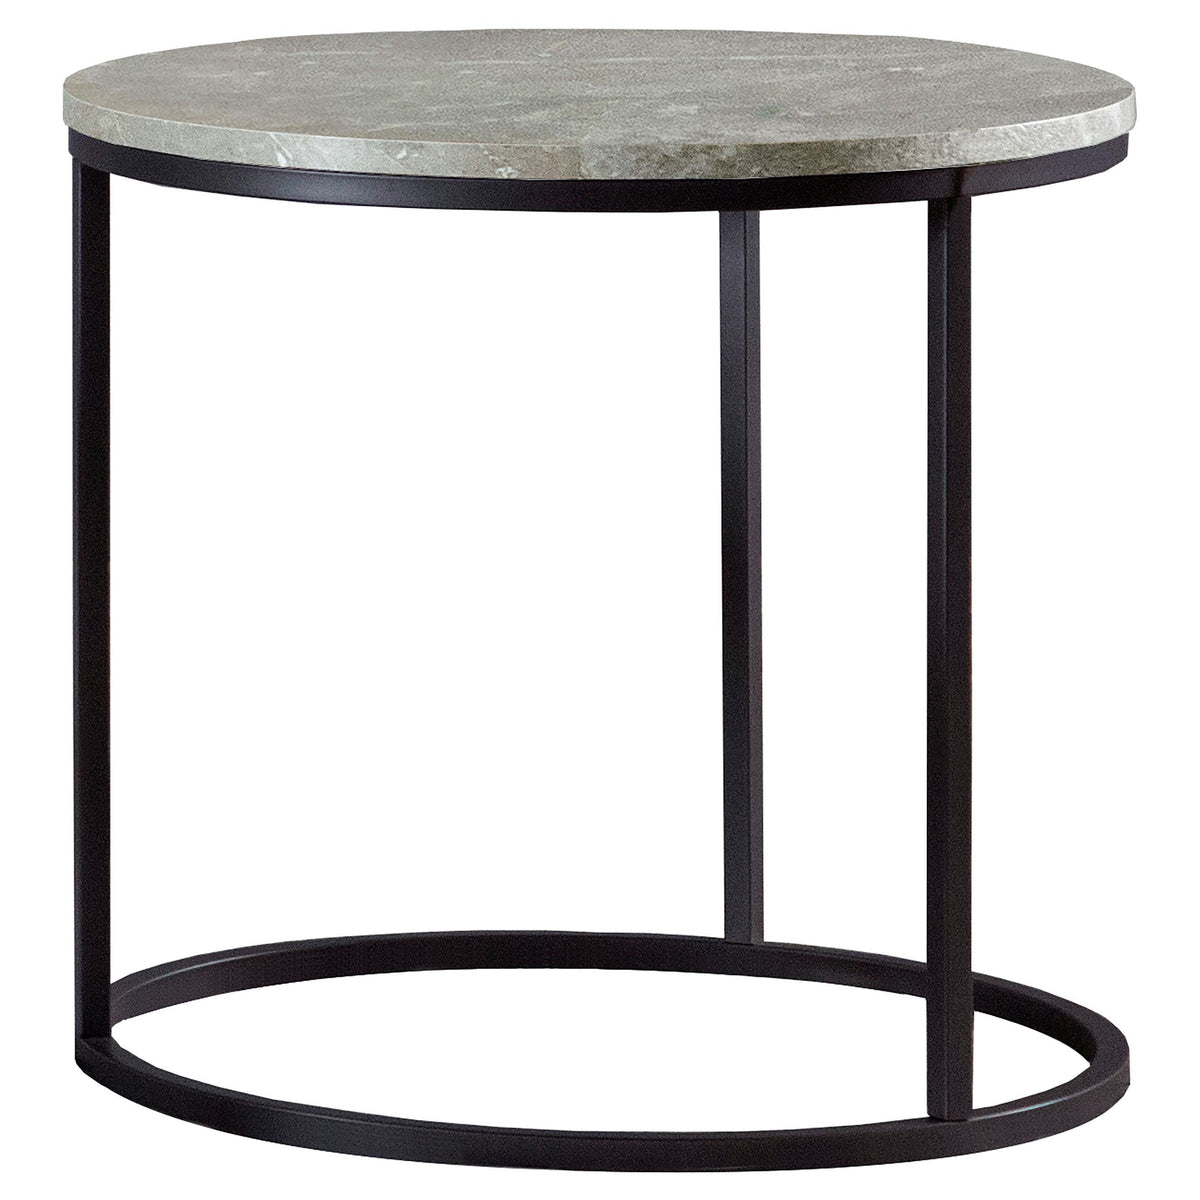 Lainey Faux Marble Round Top End Table Grey and Gunmetal Lainey Faux Marble Round Top End Table Grey and Gunmetal Half Price Furniture